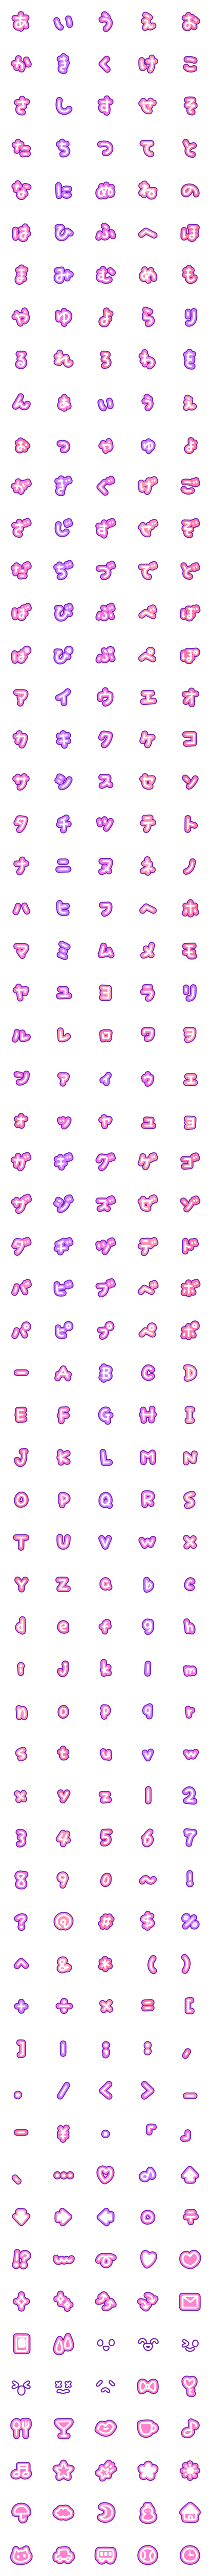 Line絵文字 ピンク 紫のかわいいデコ文字 絵文字 305種類 1円